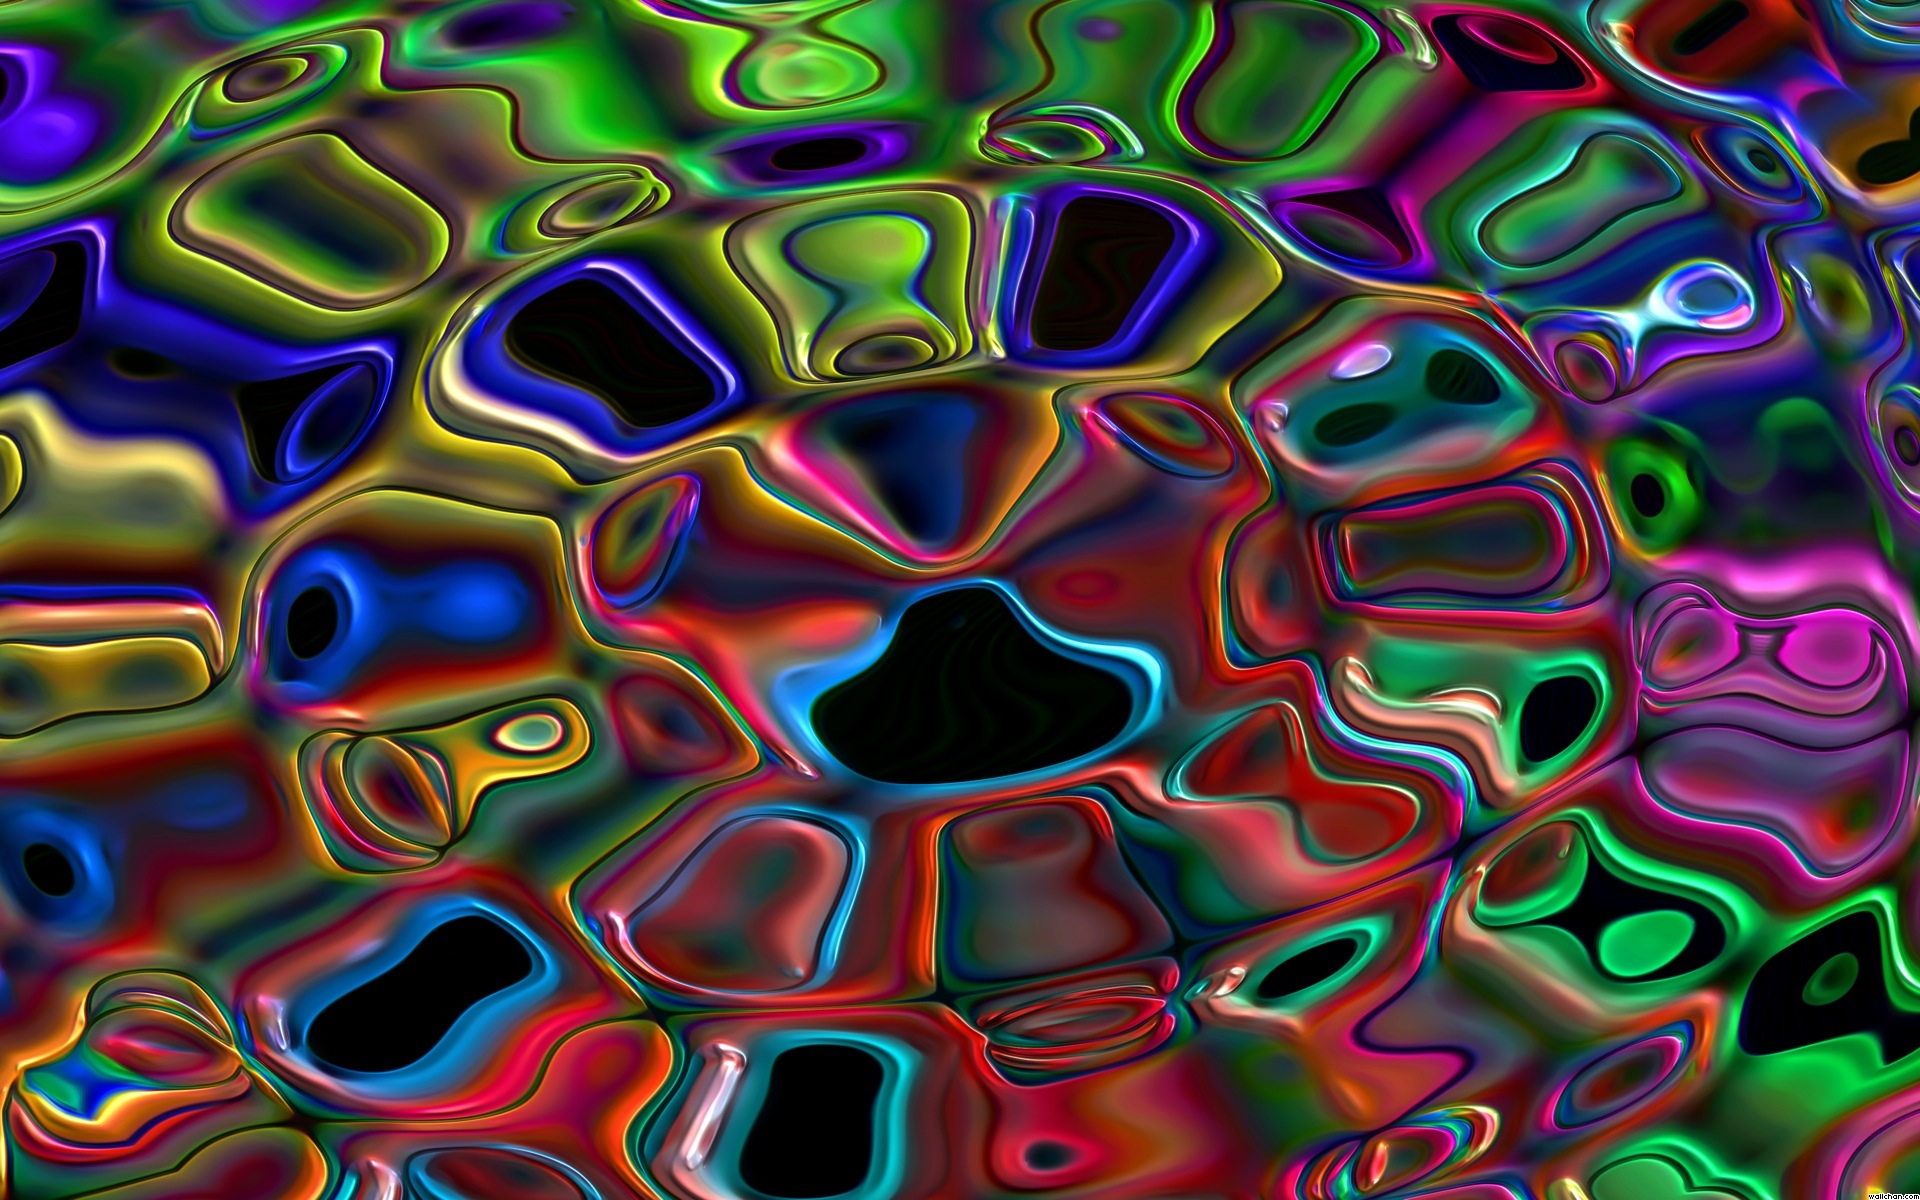  trippy desktop backgrounds Set any of these wallpapers on your screen 1920x1200